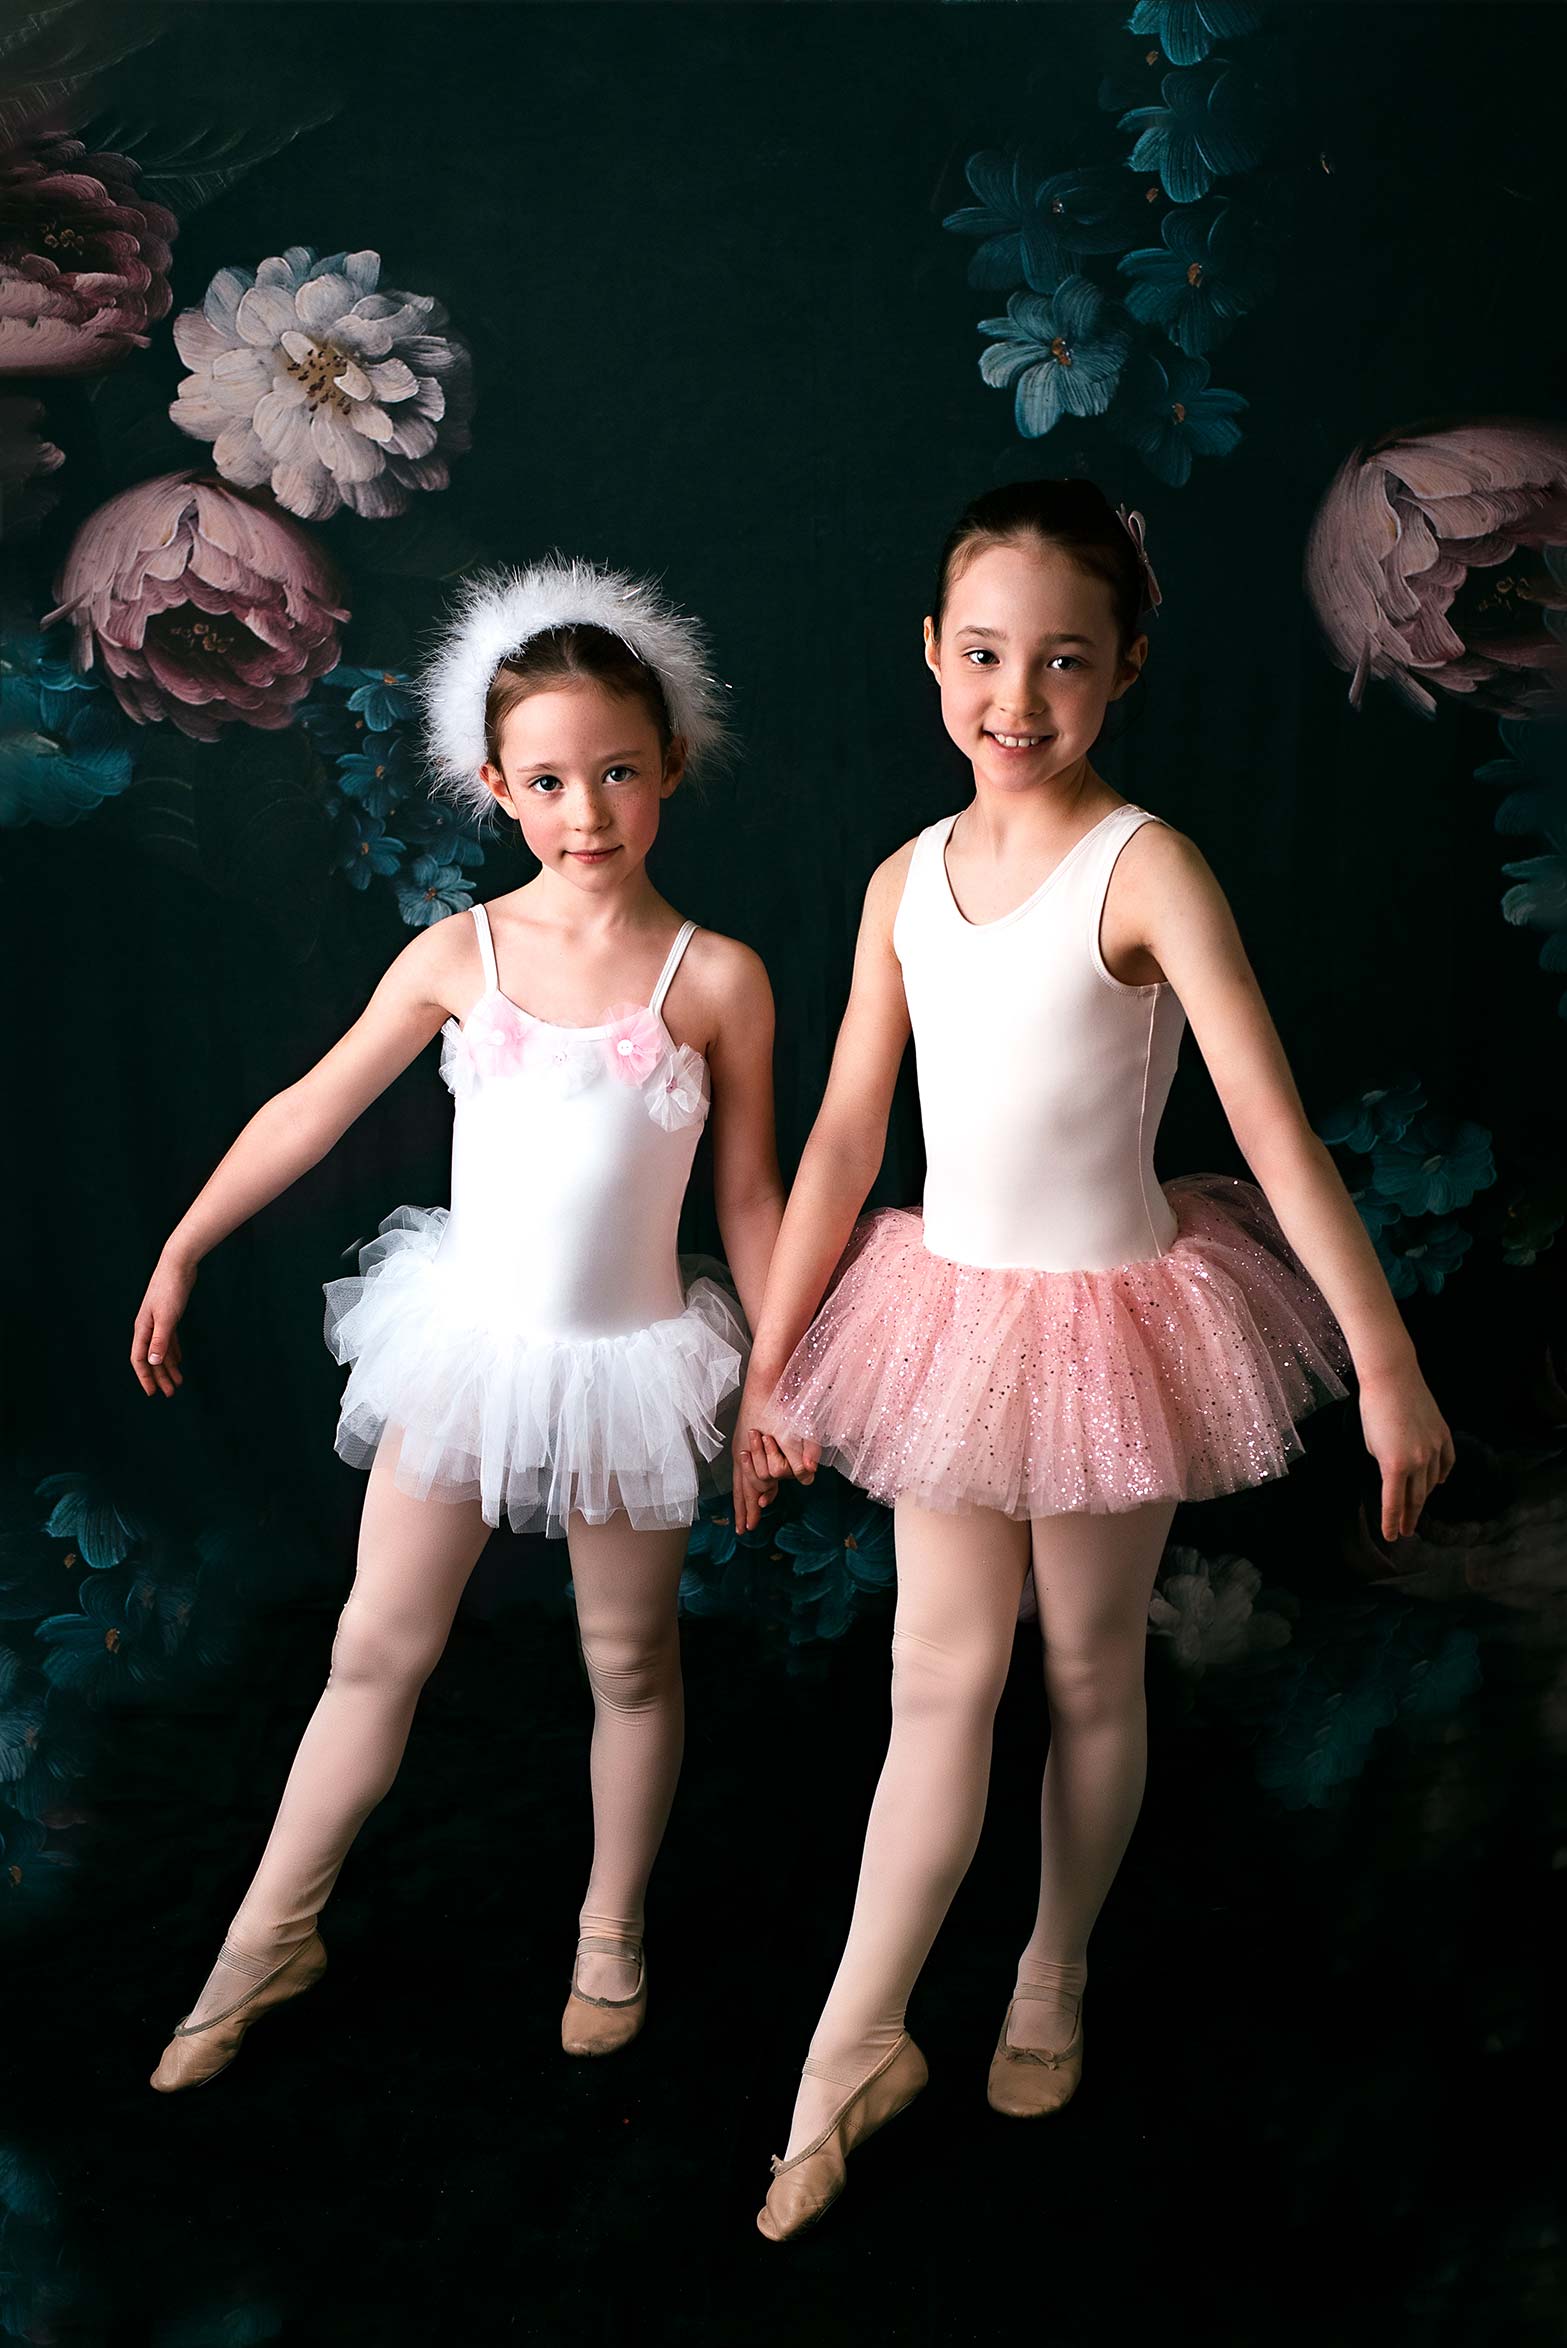 Dance photoshoot by Appleberry studio on location for Stargaze Dance Academy in Bolton specialising in Ballet, Contemporary, Tap and Modern Dance Genres.